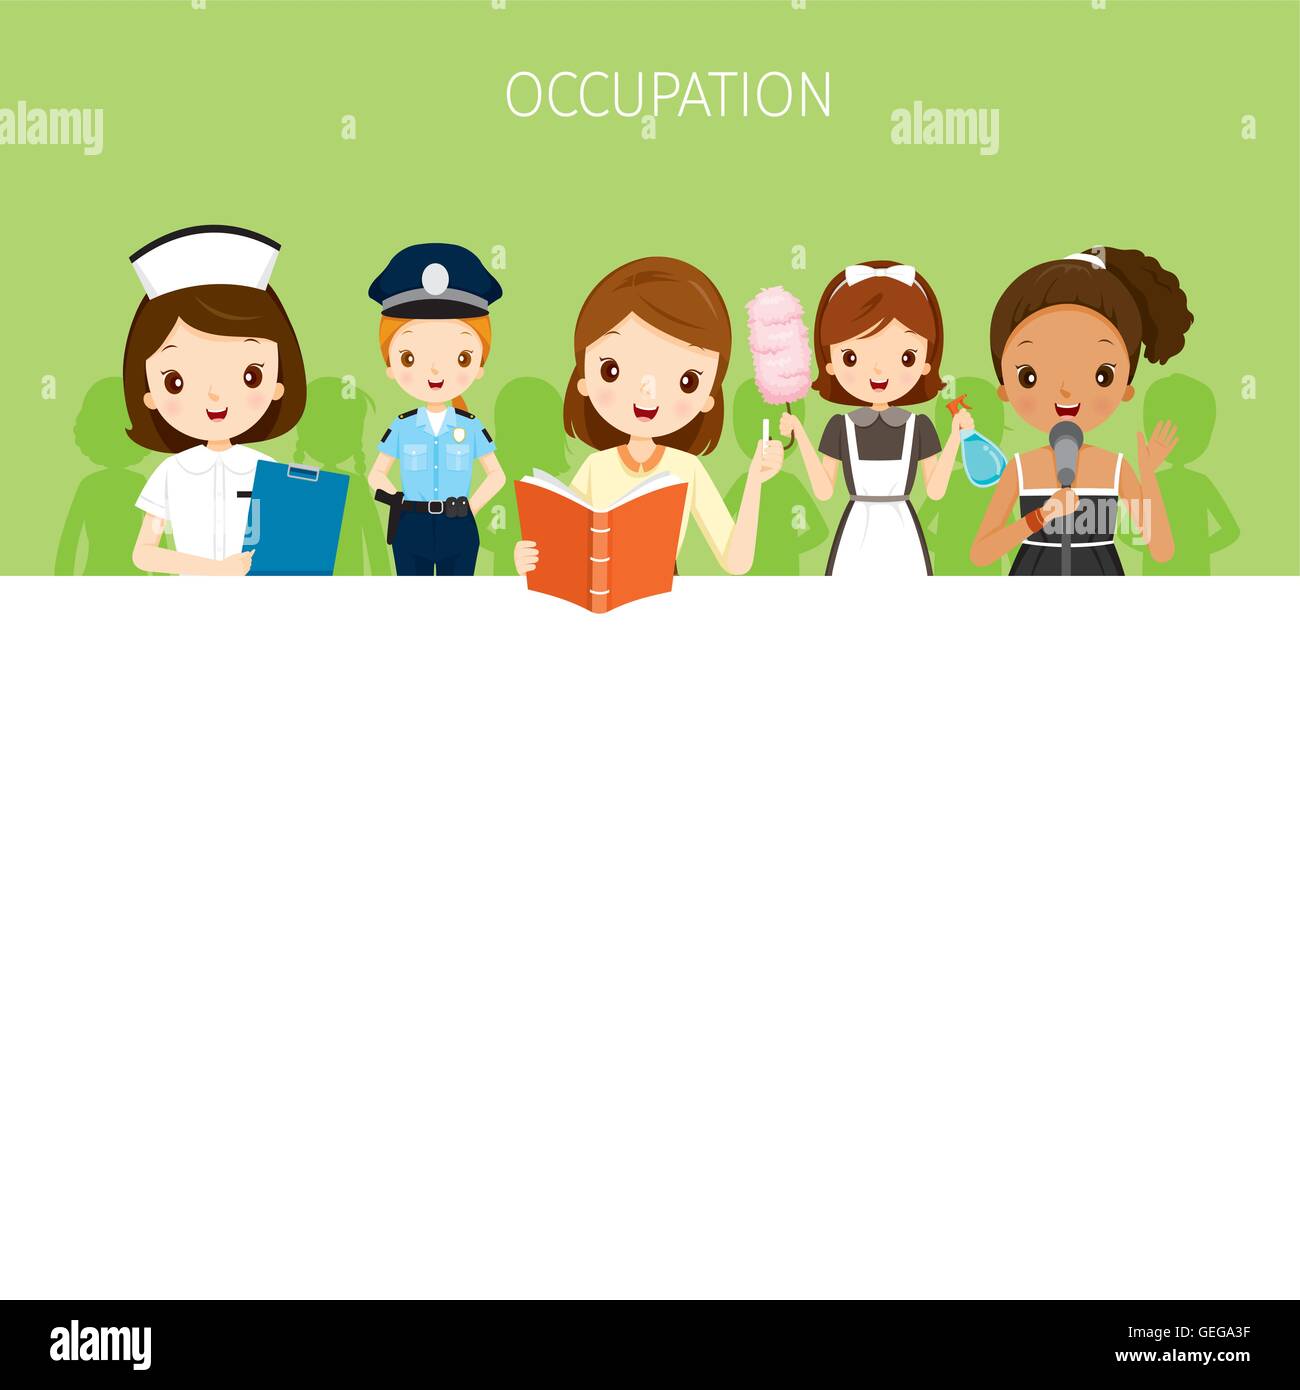 Woman, People With Different Occupations Set On Banner, Profession, Avatar, Worker, Job, Duty Stock Vector